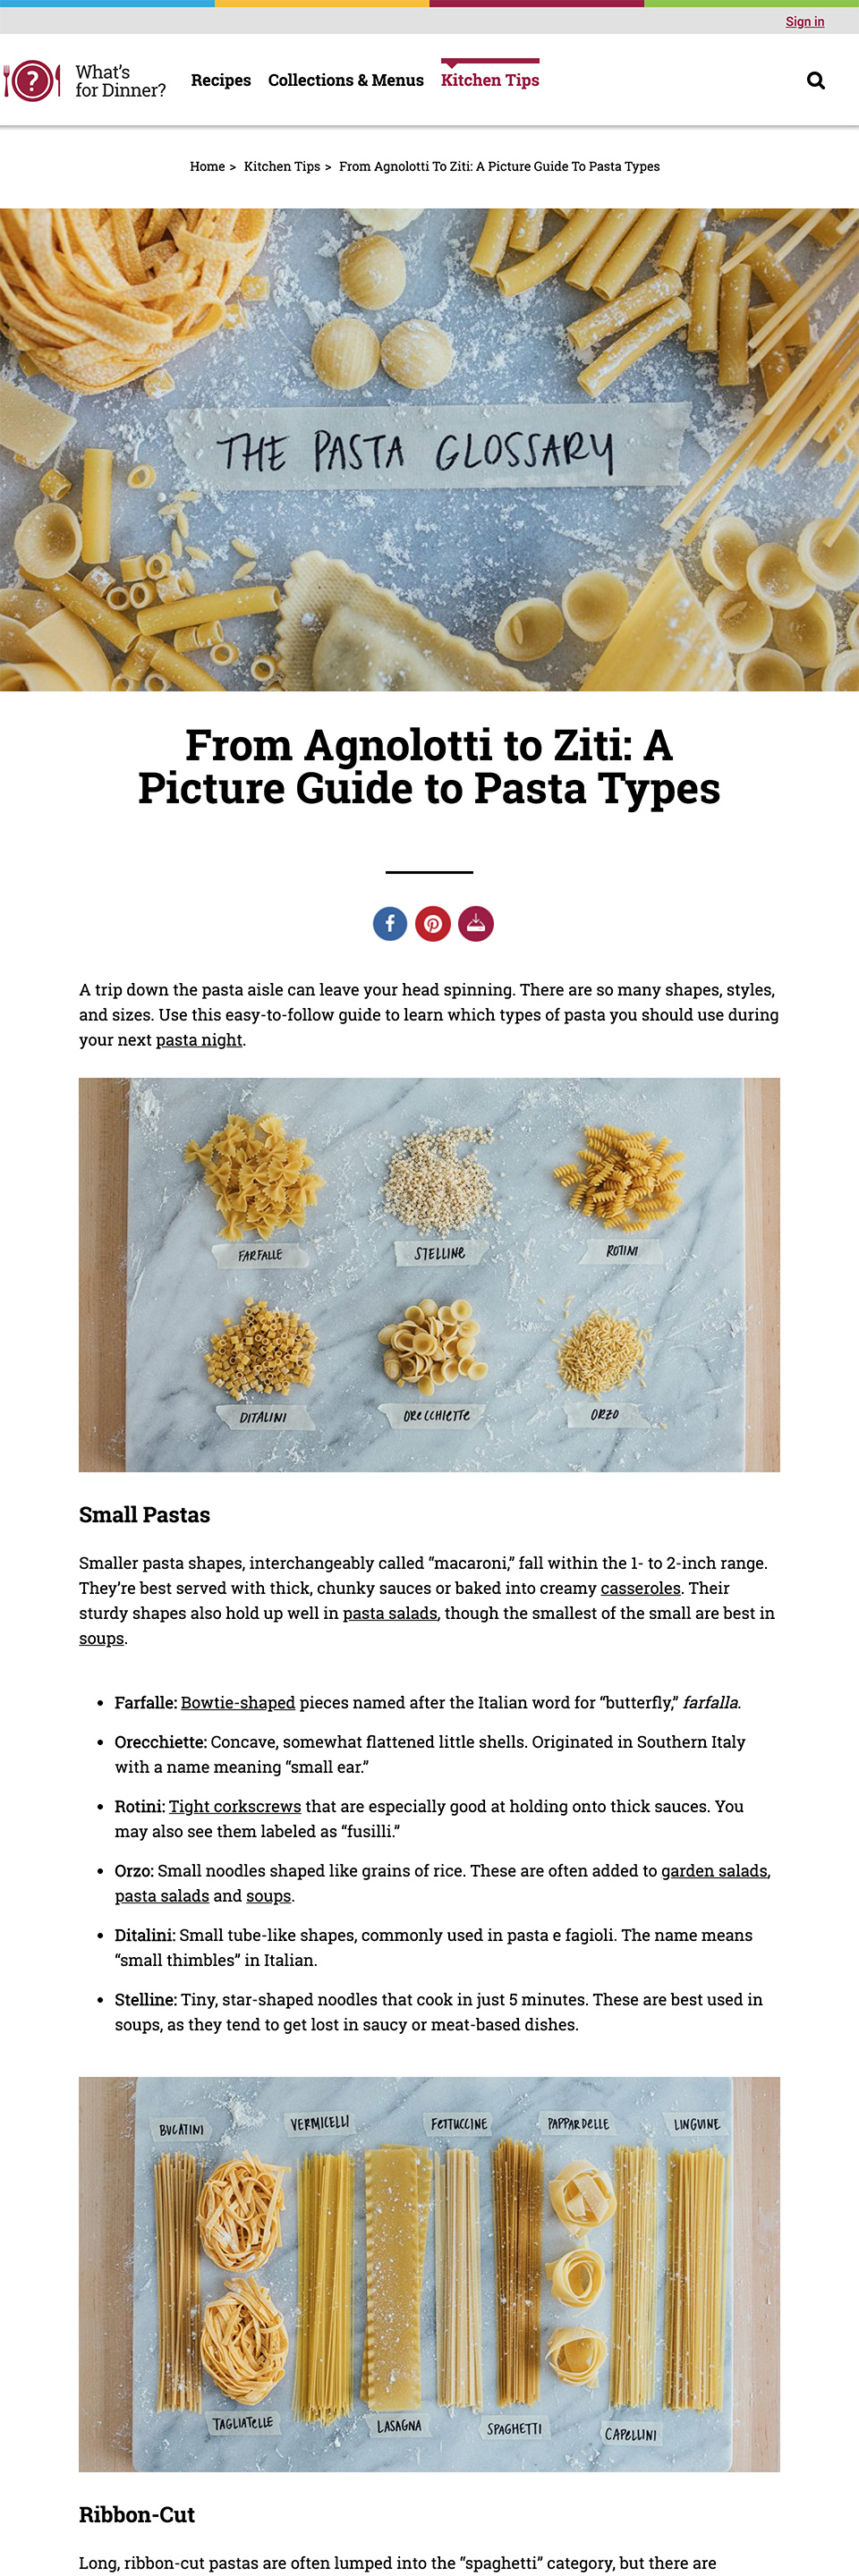 Article: From Agnolotti to Ziti: A Picture Guide to Pasta Types - Dish Works